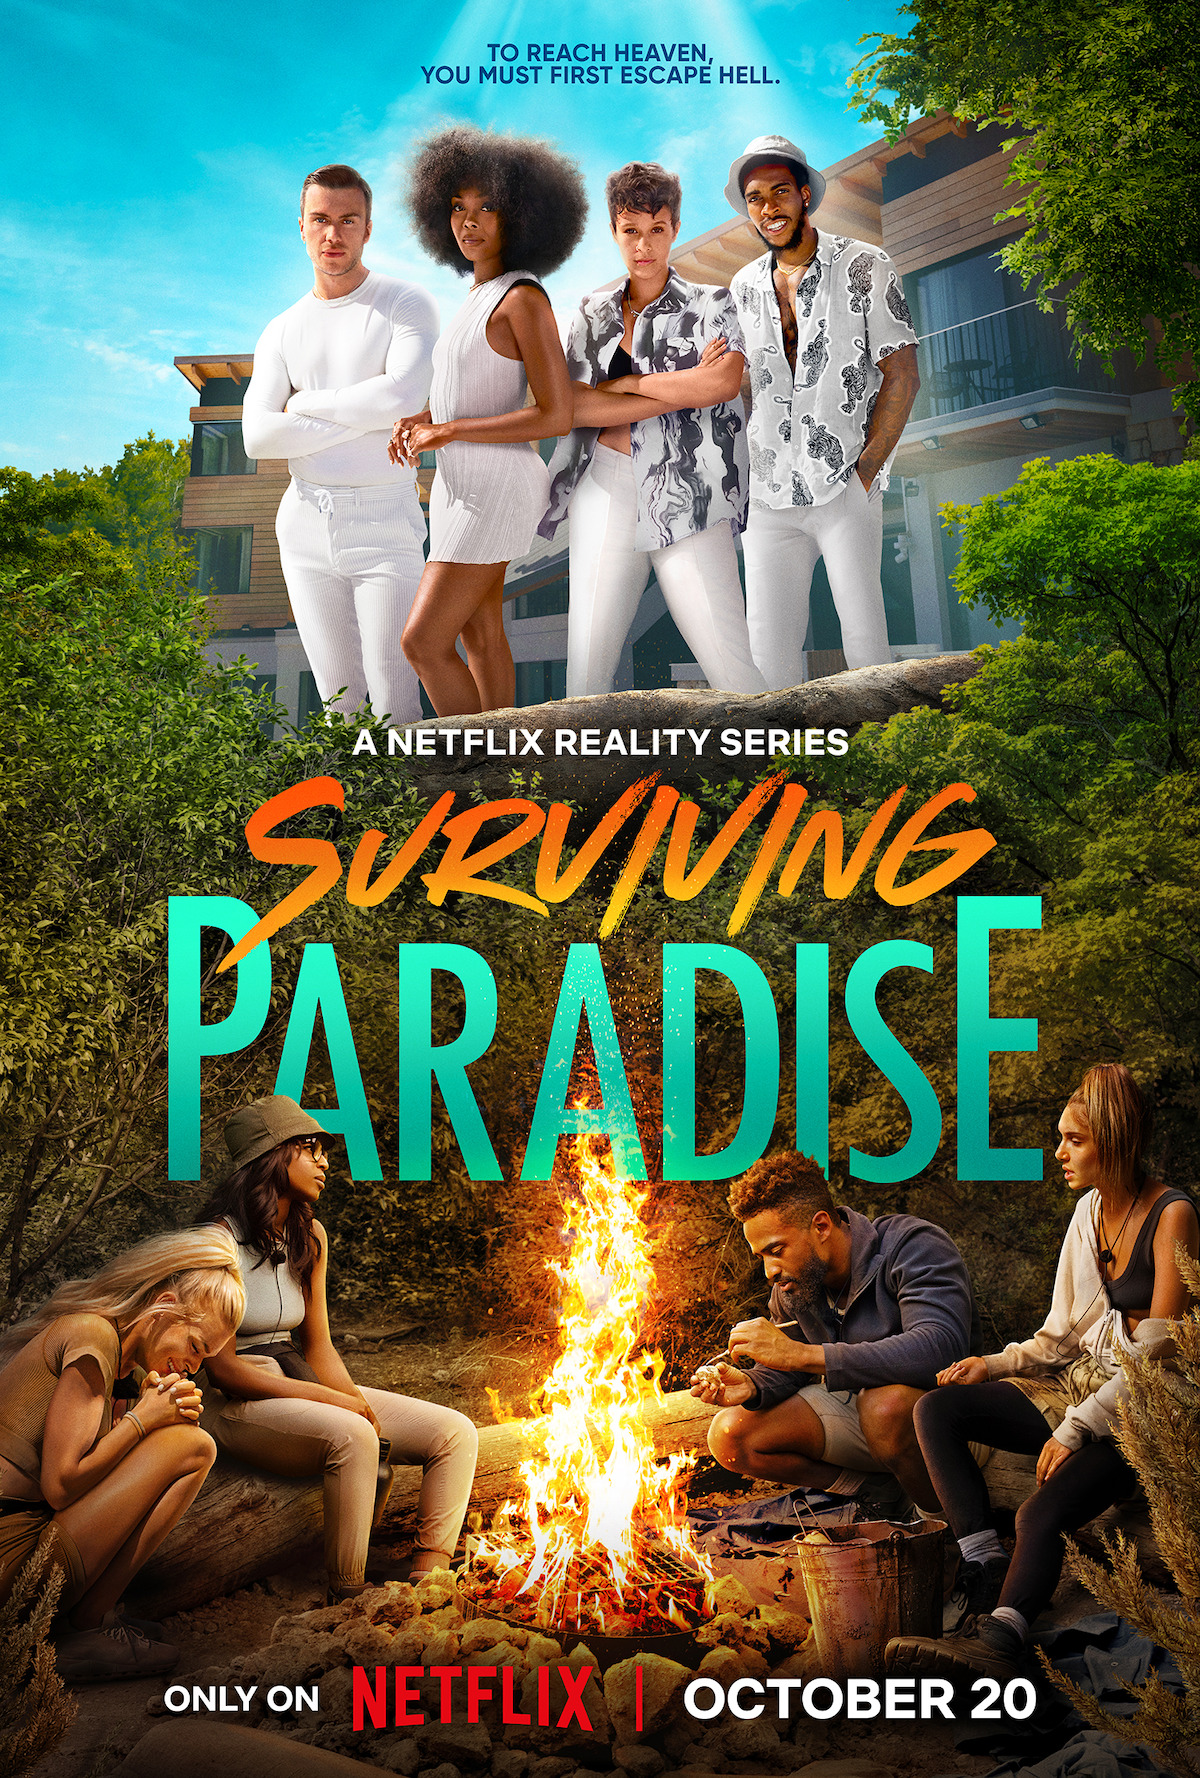 Hell's Paradise: Season 1 Episodes Guide – Release Dates, Times